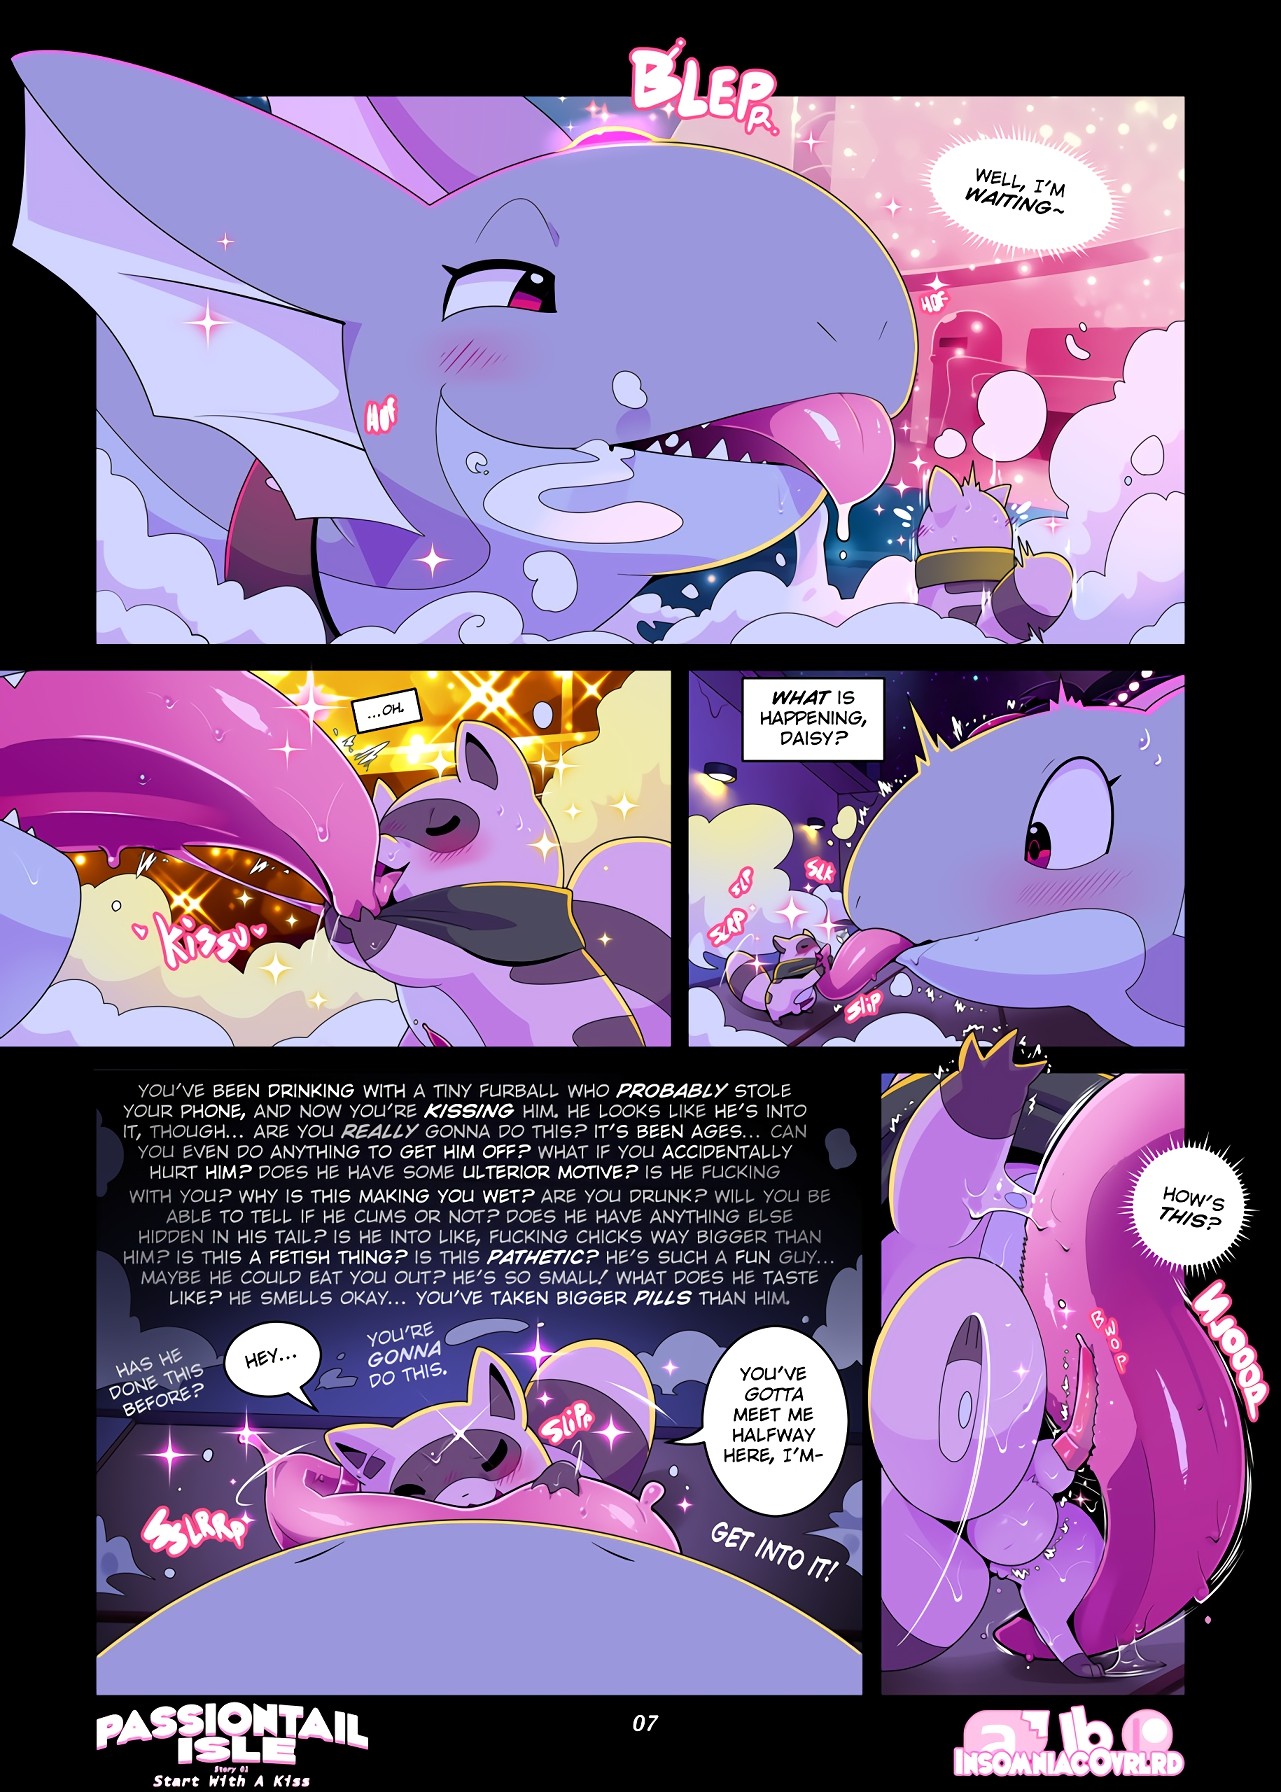 Passiontail Isle by Insomniacovrlrd porn comic picture 8